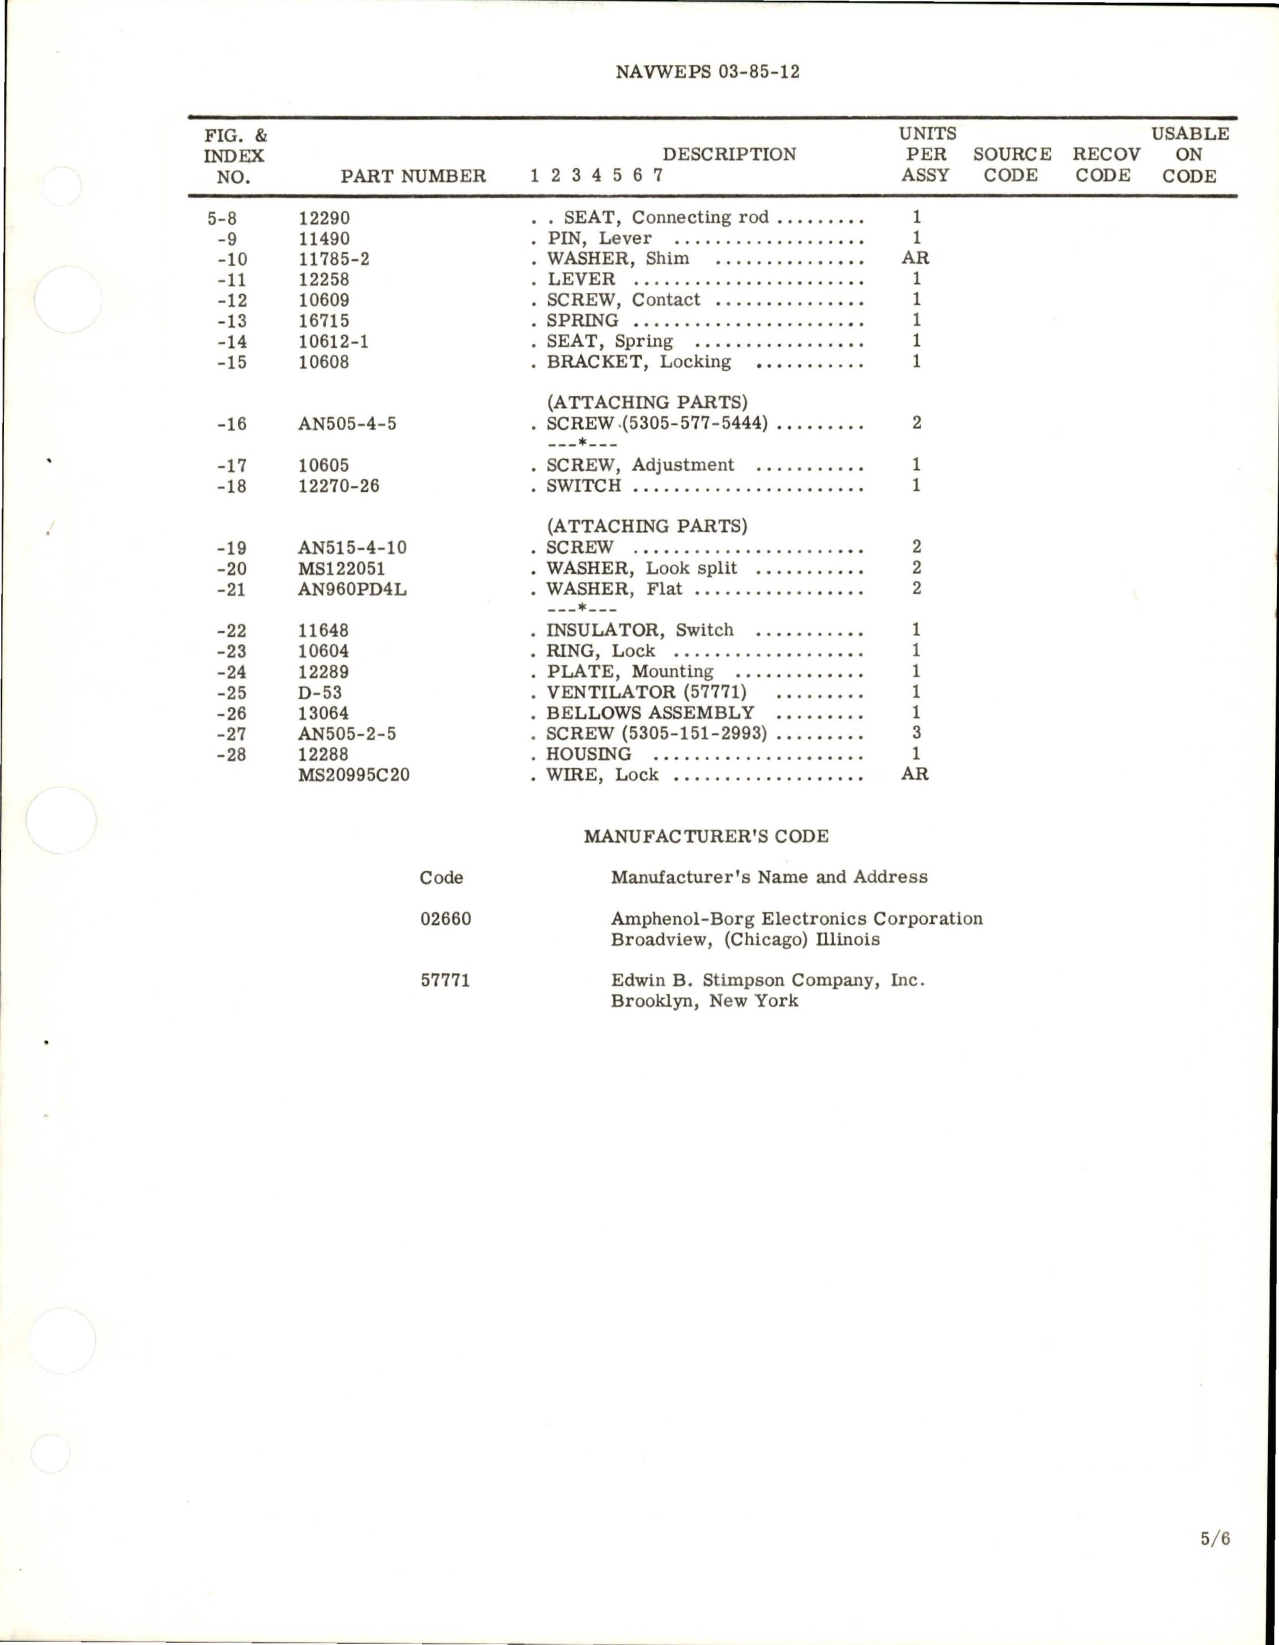 Sample page 5 from AirCorps Library document: Overhaul Instructions with Parts Breakdown for Pressure Switch - M-1001W-3-1 (Aerotec) - 6808815 (Aerotec)